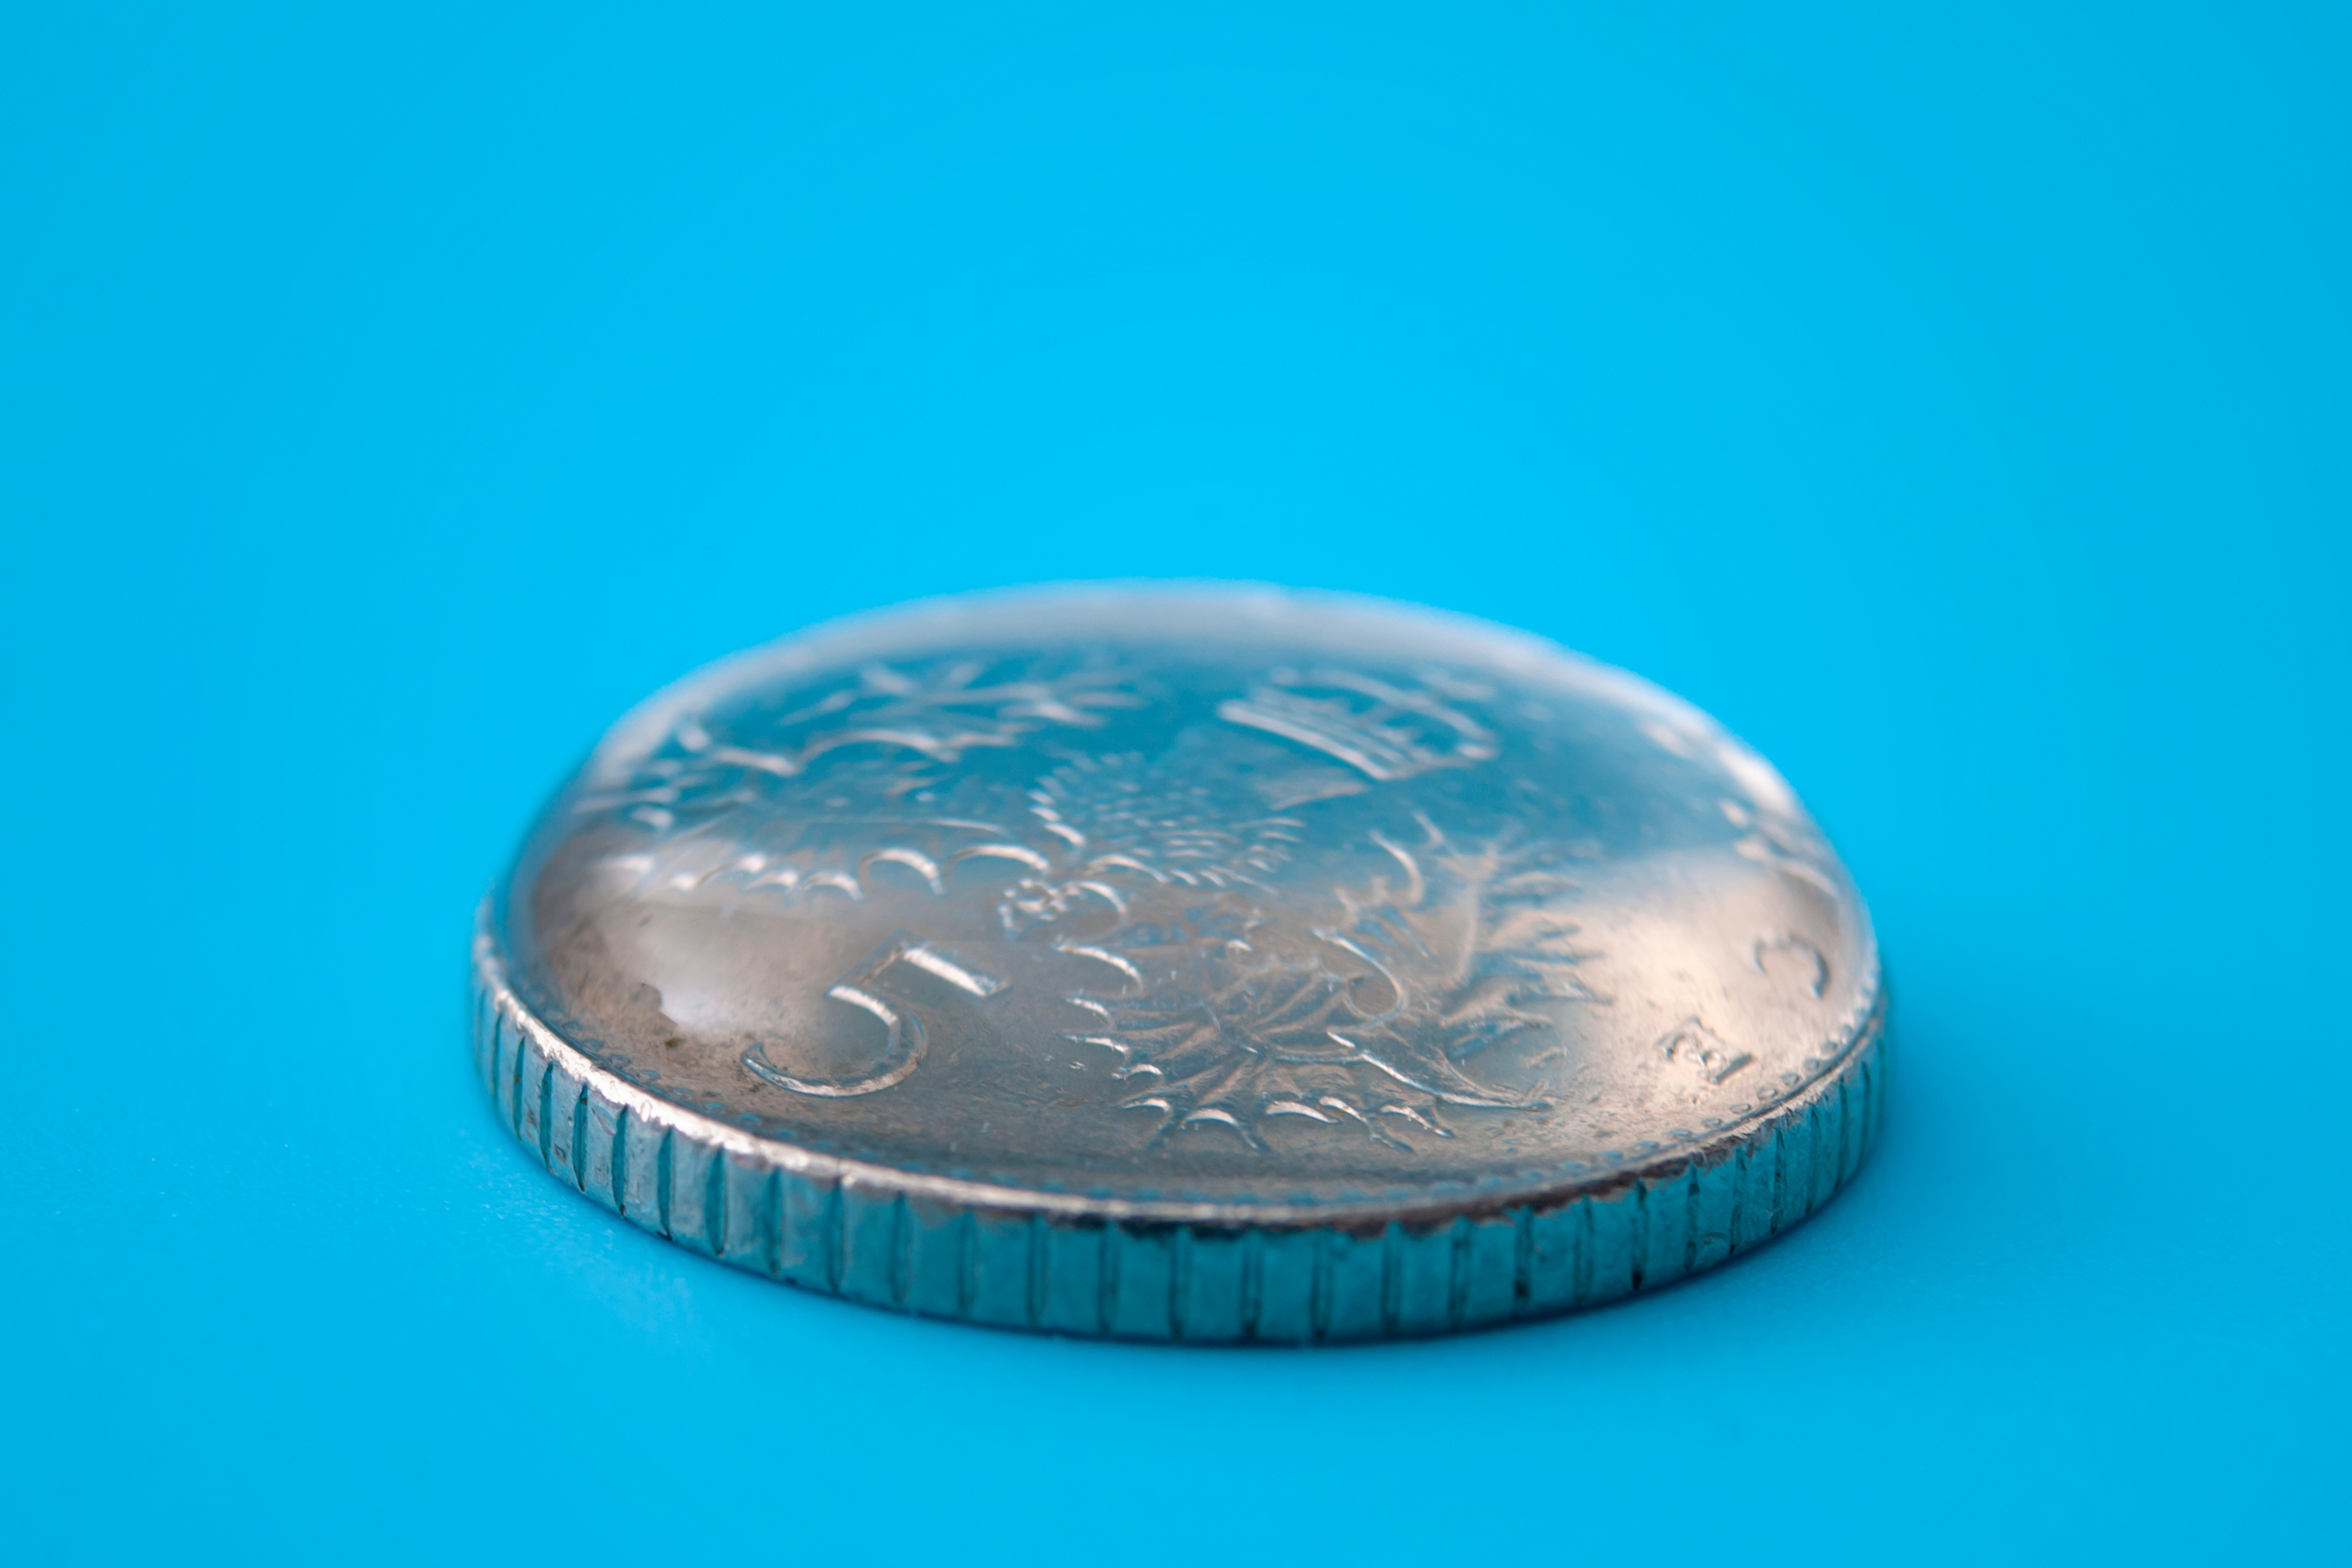 water on a coin for a surface tension activity